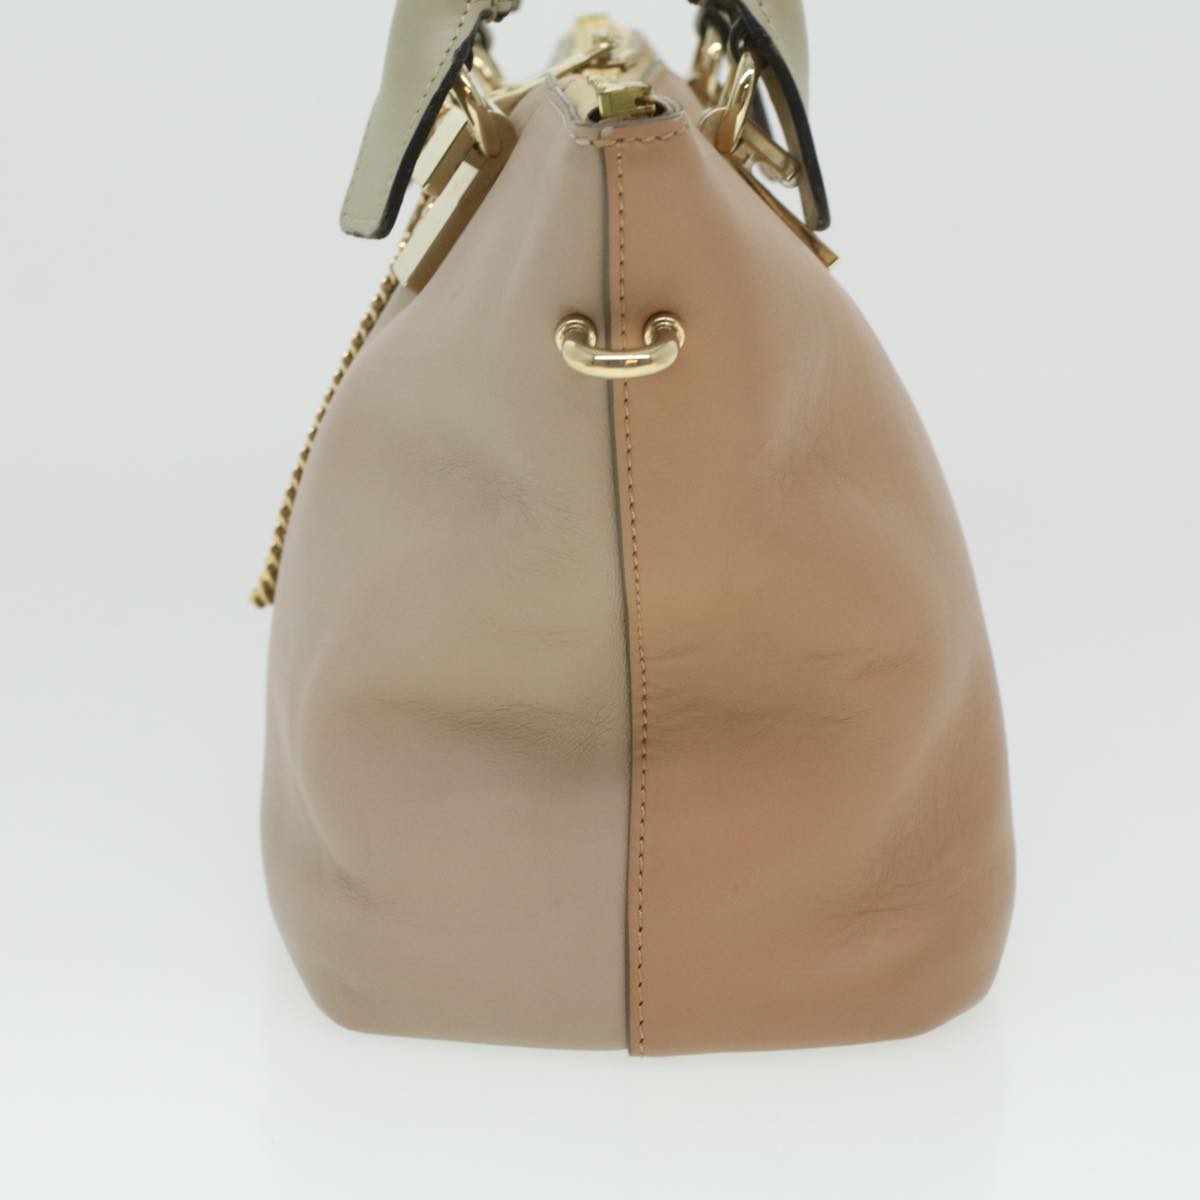 Chloe Bailey Hand Bag Leather 2way Beige Pink Auth 35664